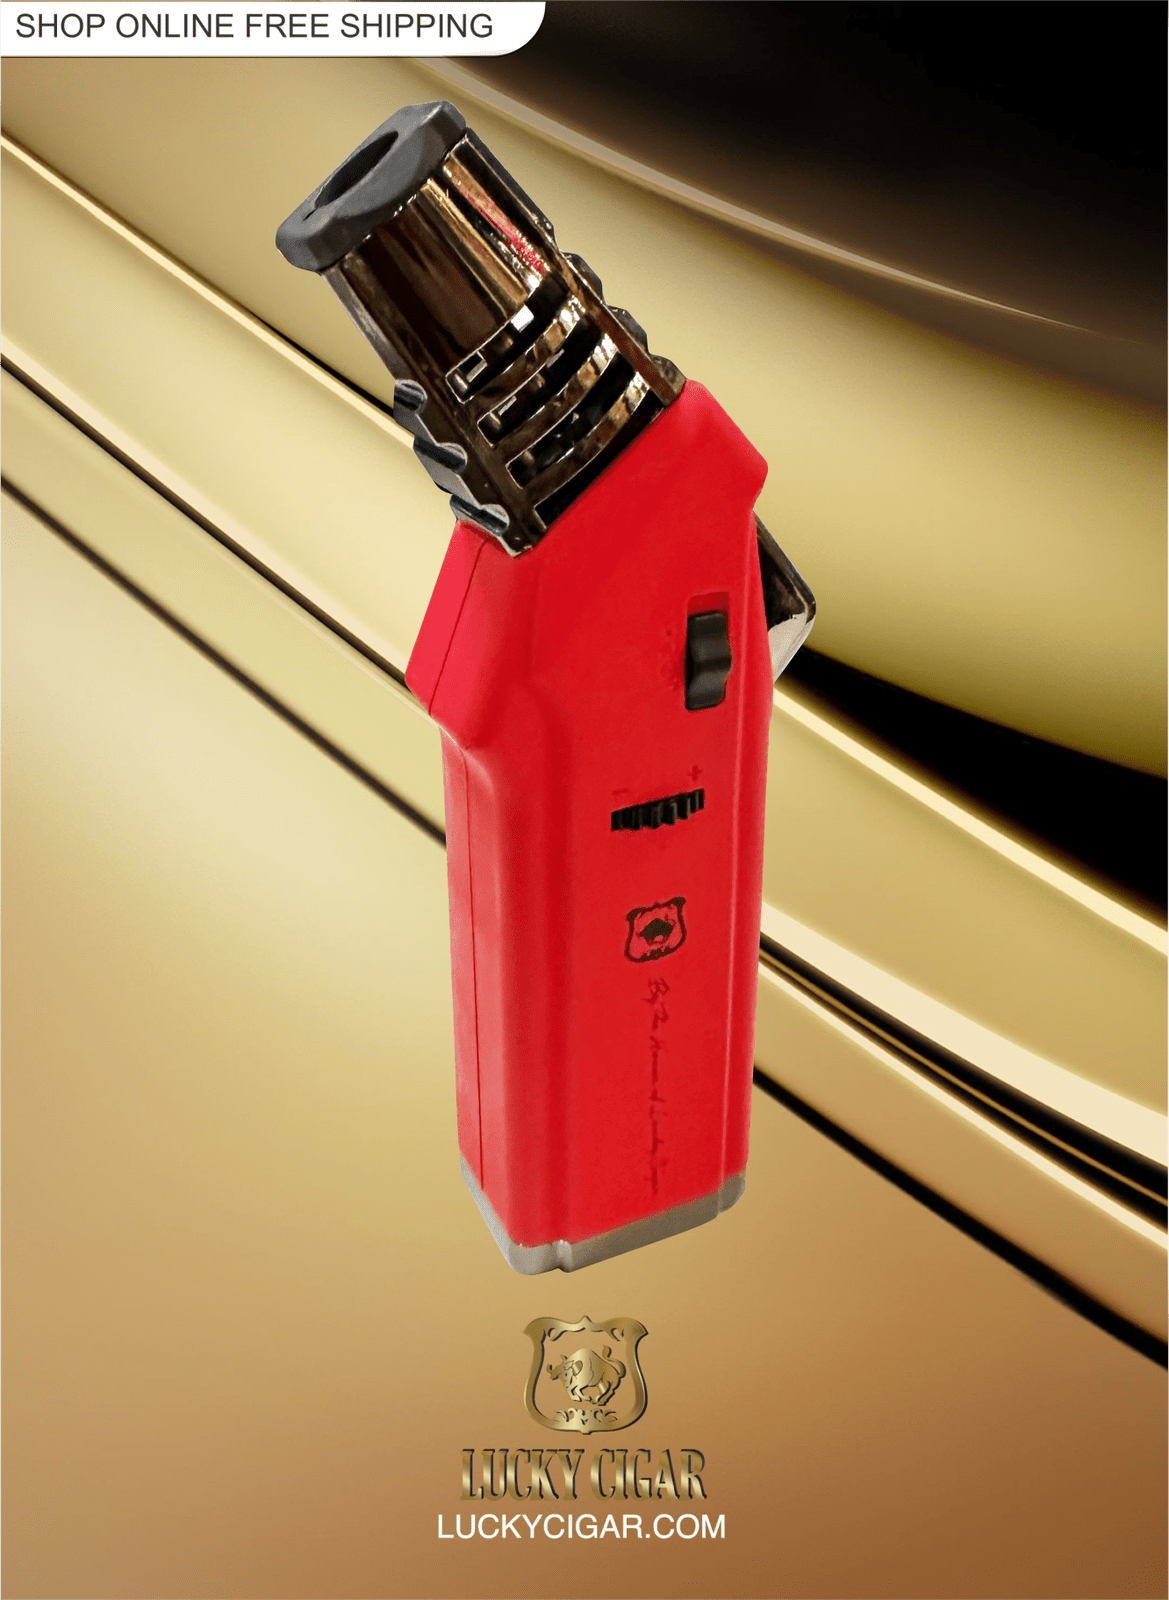 Cigar Lifestyle Accessories: Torch Lighter with in Red